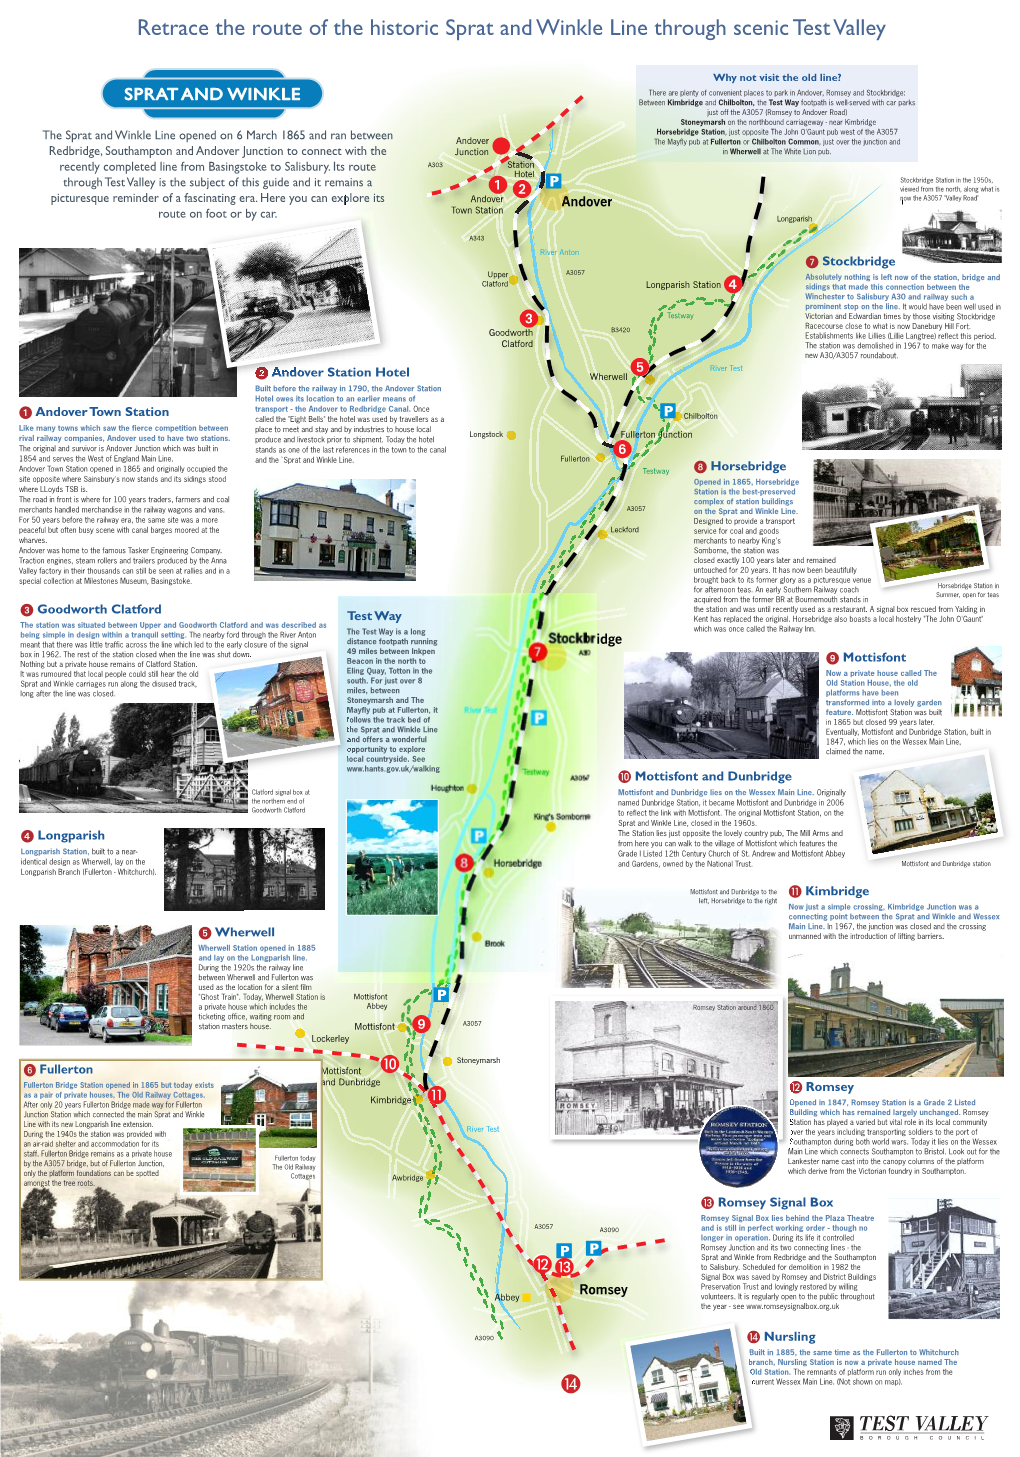 Retrace the Route of the Historic Sprat and Winkle Line Through Scenic Test Valley